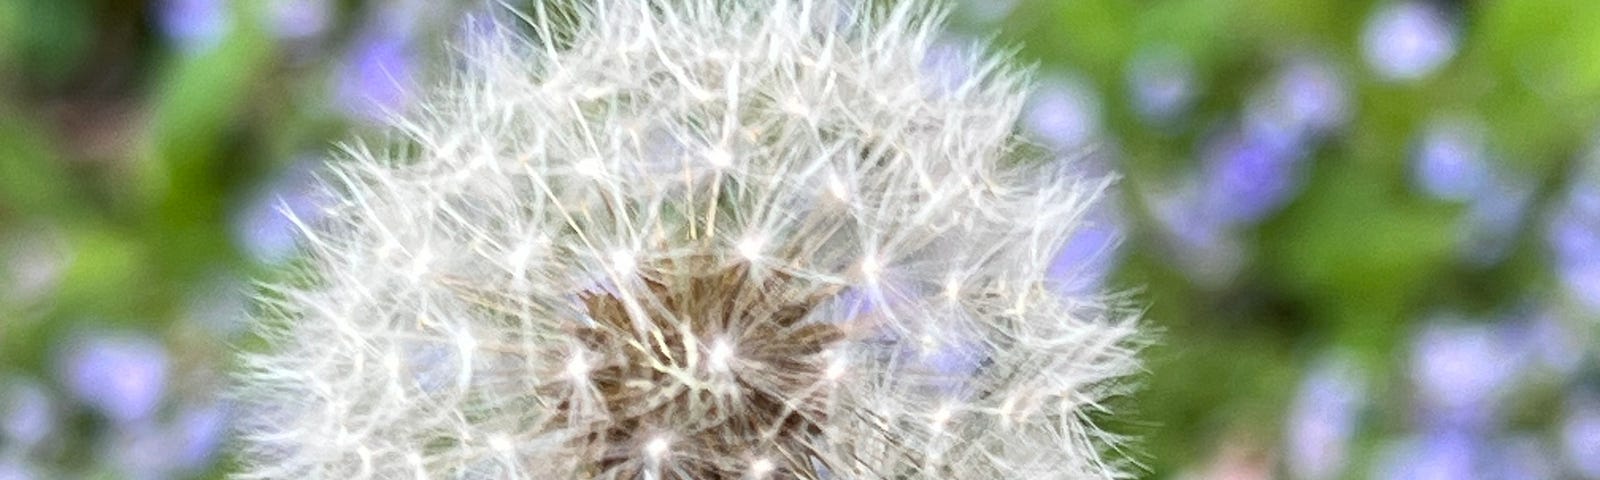 Photo of a dandelion seed-head, as yet unscattered by the Breath of God.